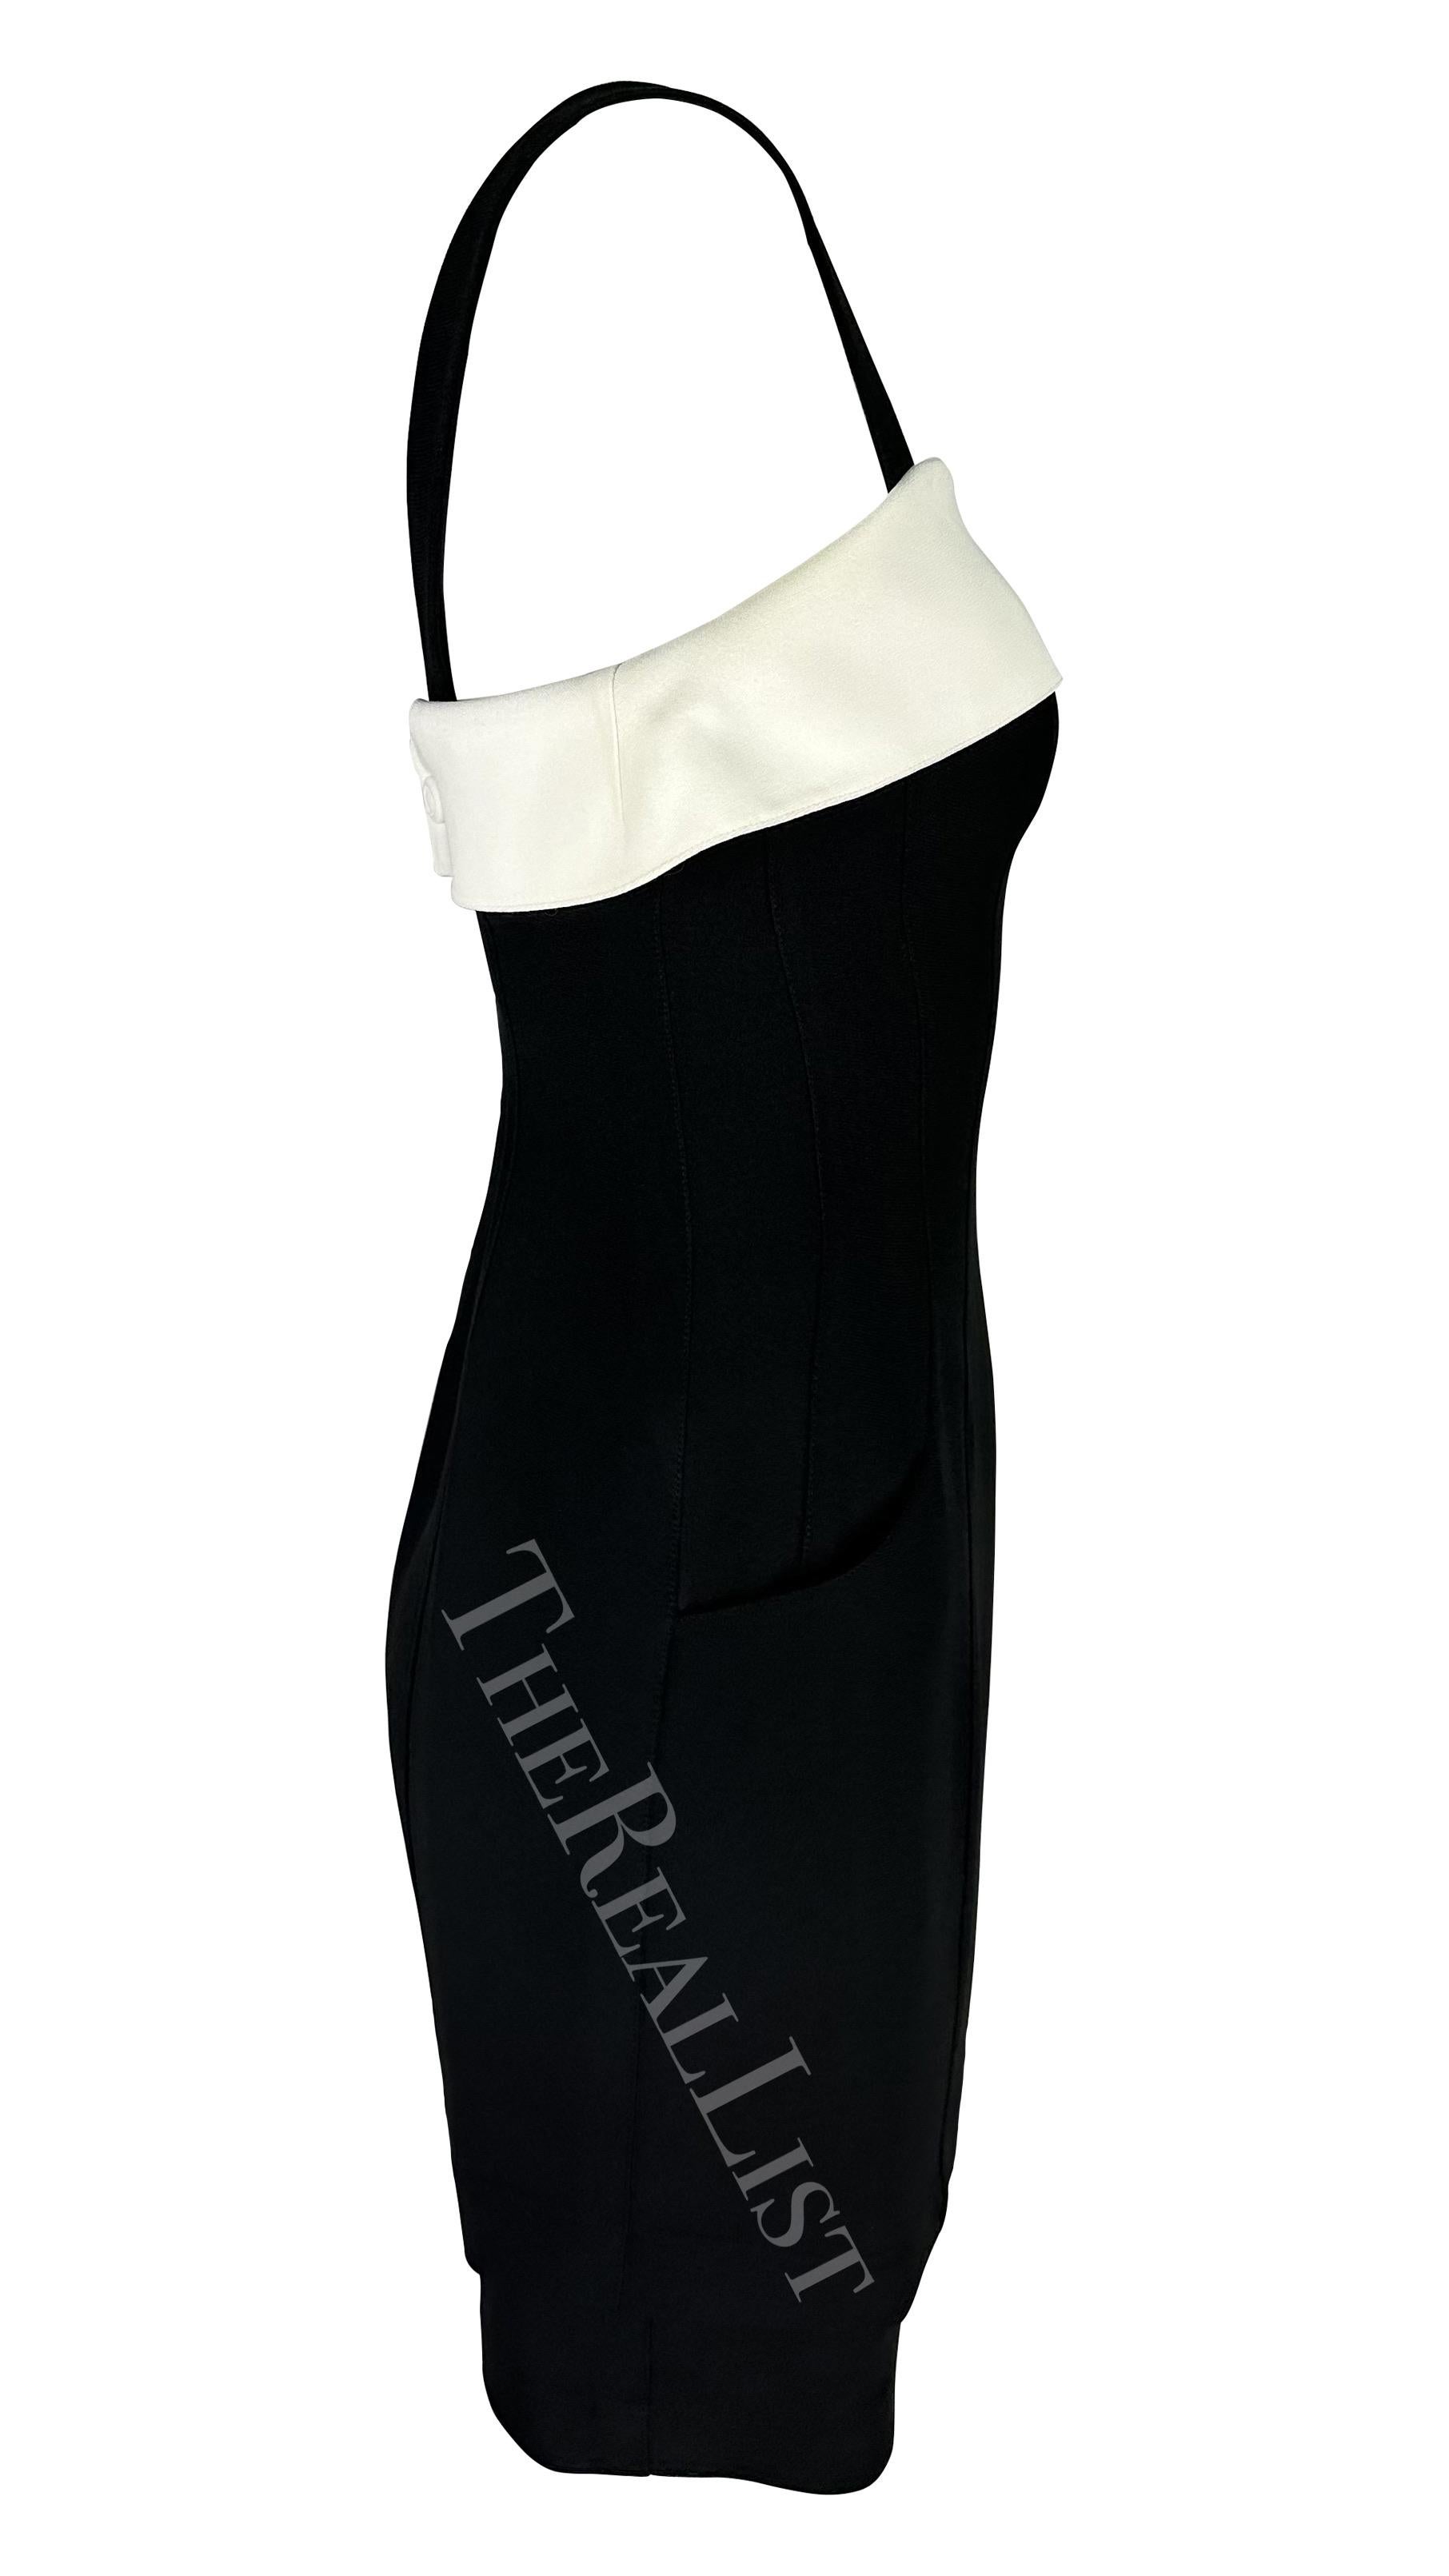 S/S 1996 Thierry Mugler Runway Black White Trim Cinched Mini Dress For Sale 1